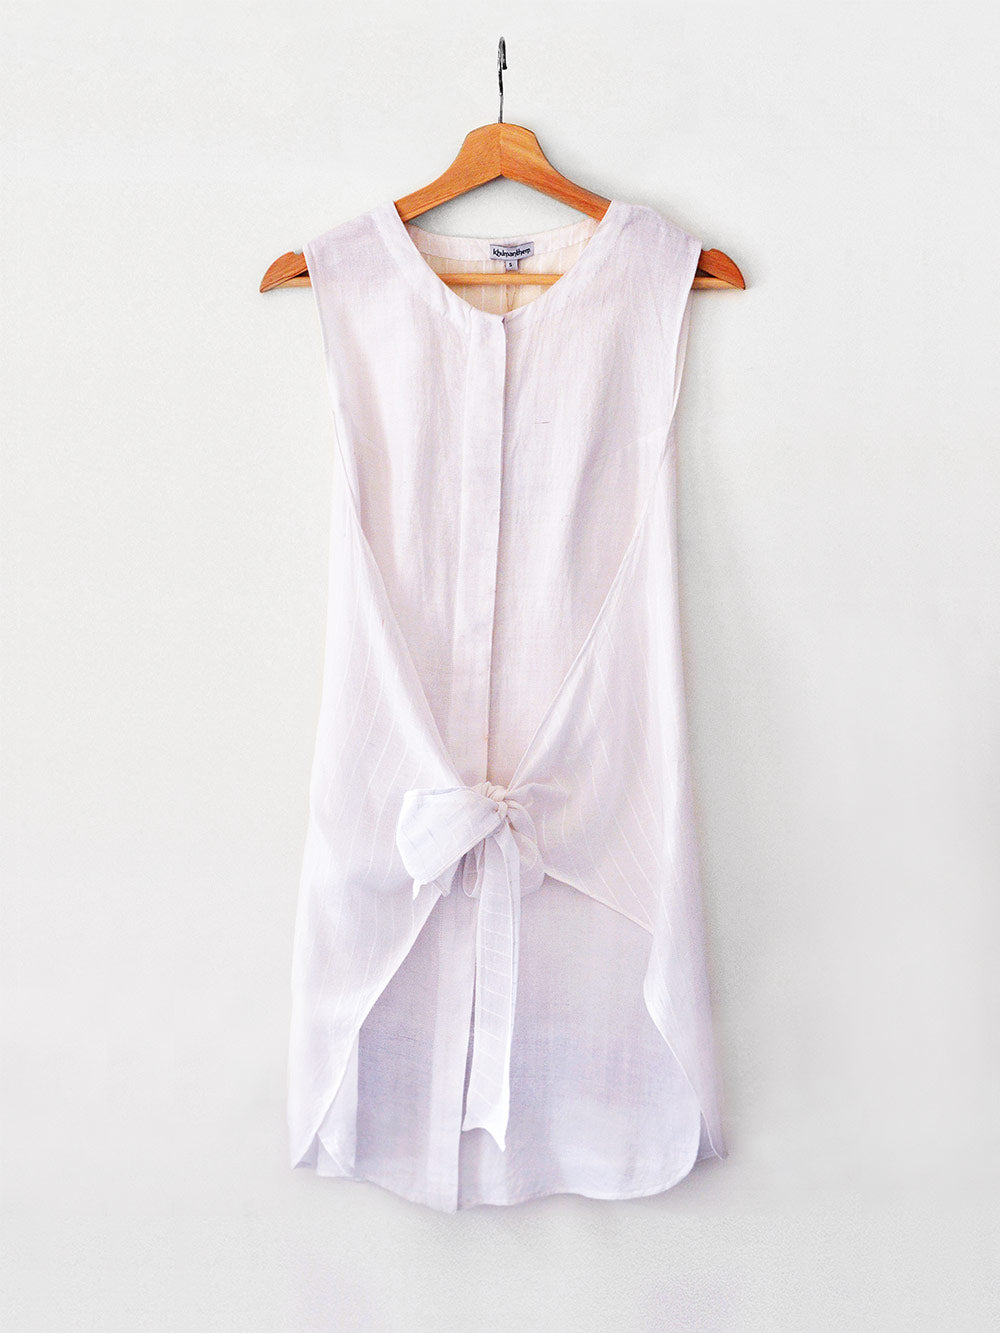 Handwoven Sleeveless shirt with tie-up, designed Khumanthem Atelier